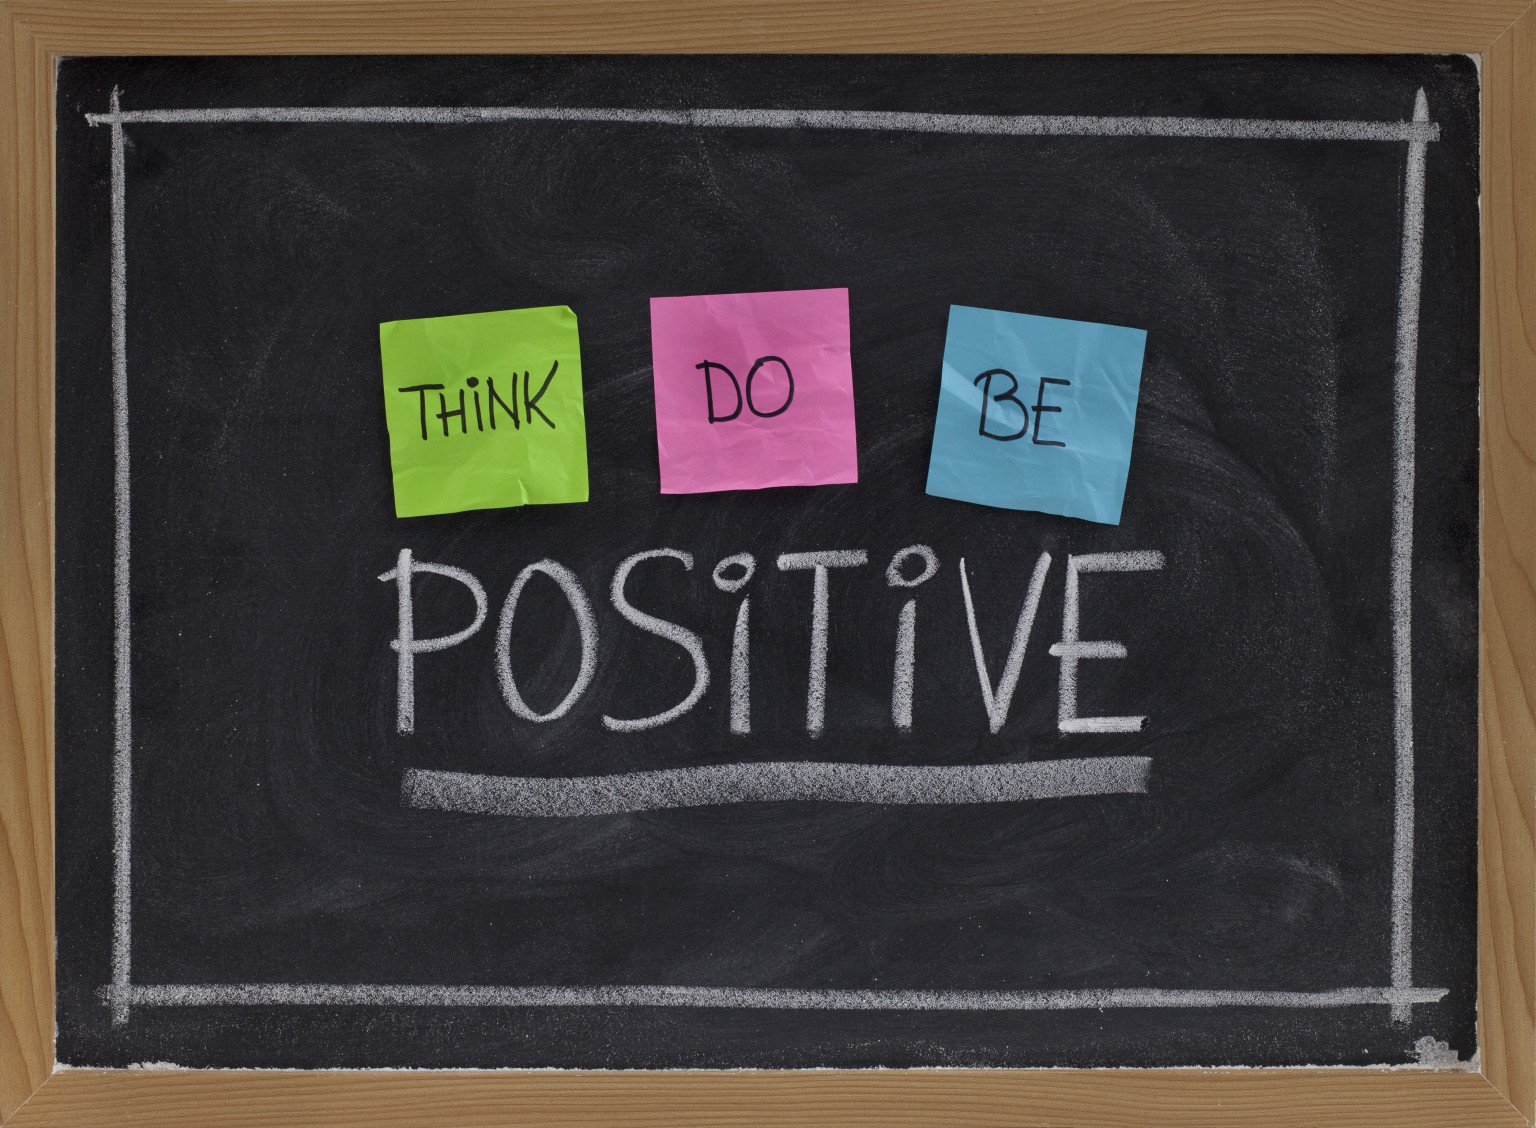 Think Do Be Positive - HD Wallpaper 